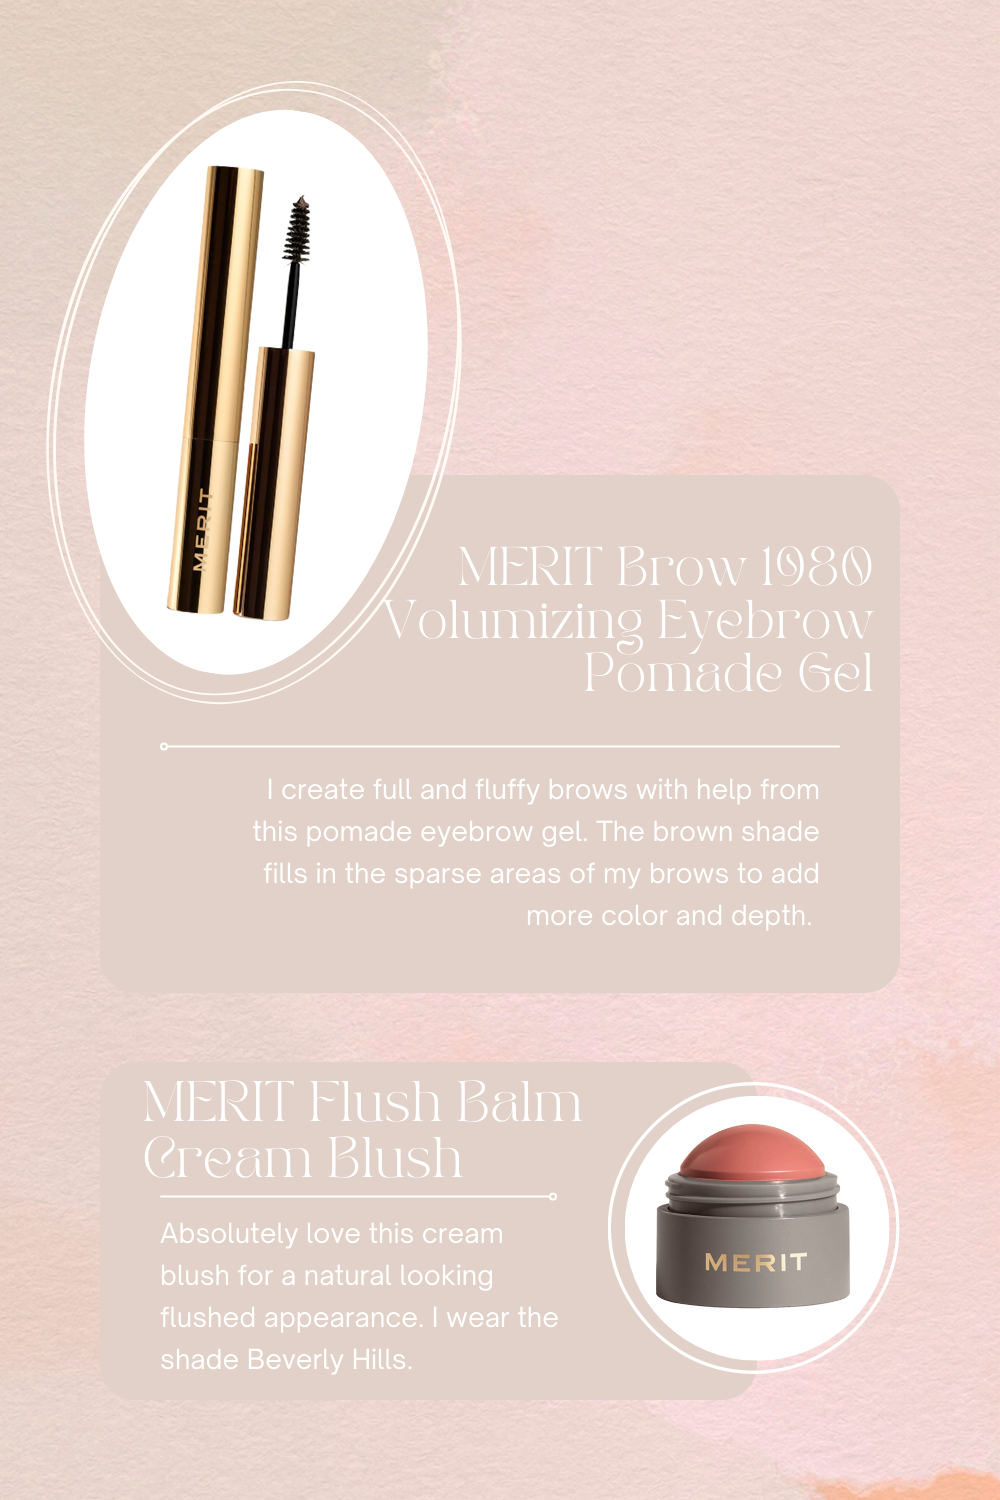 Sharing my clean beauty makeup routine with products from Merit Beauty, Ilia, and PUR Cosmetics. How to Look Pretty with Minimal Makeup.